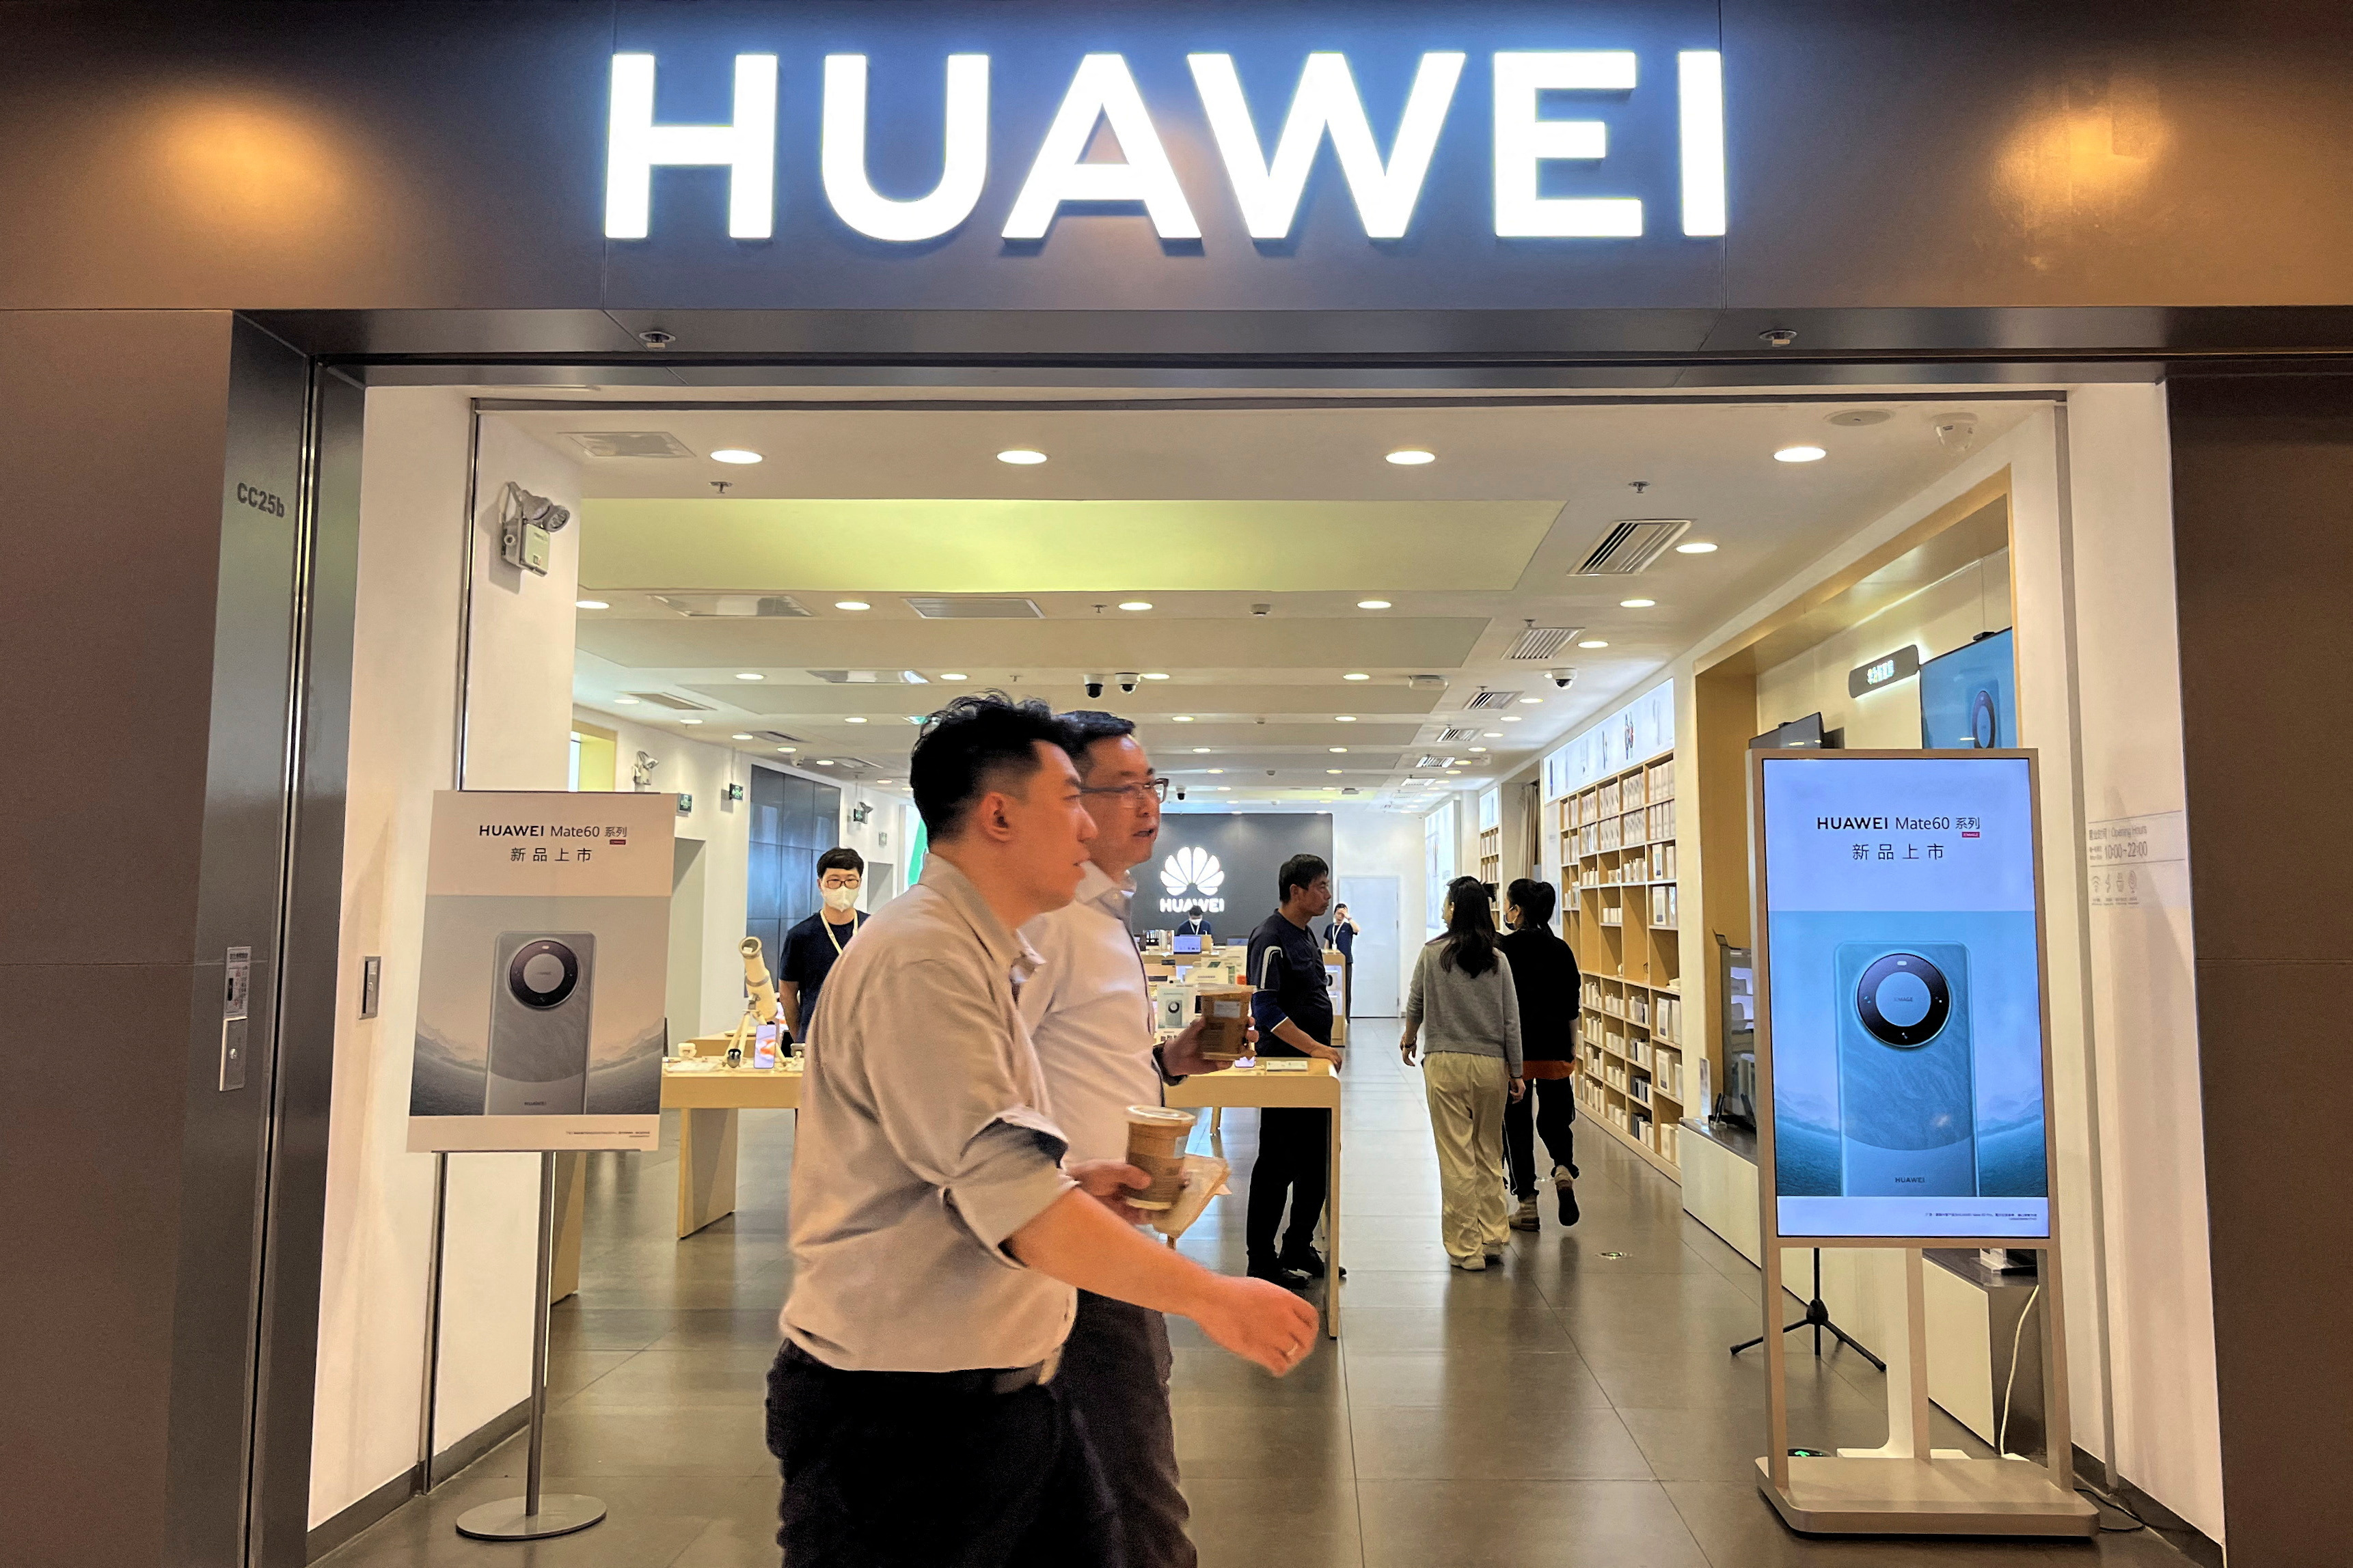 China's Propaganda Victory Over US Sanctions: Huawei's Mate 60 Pro